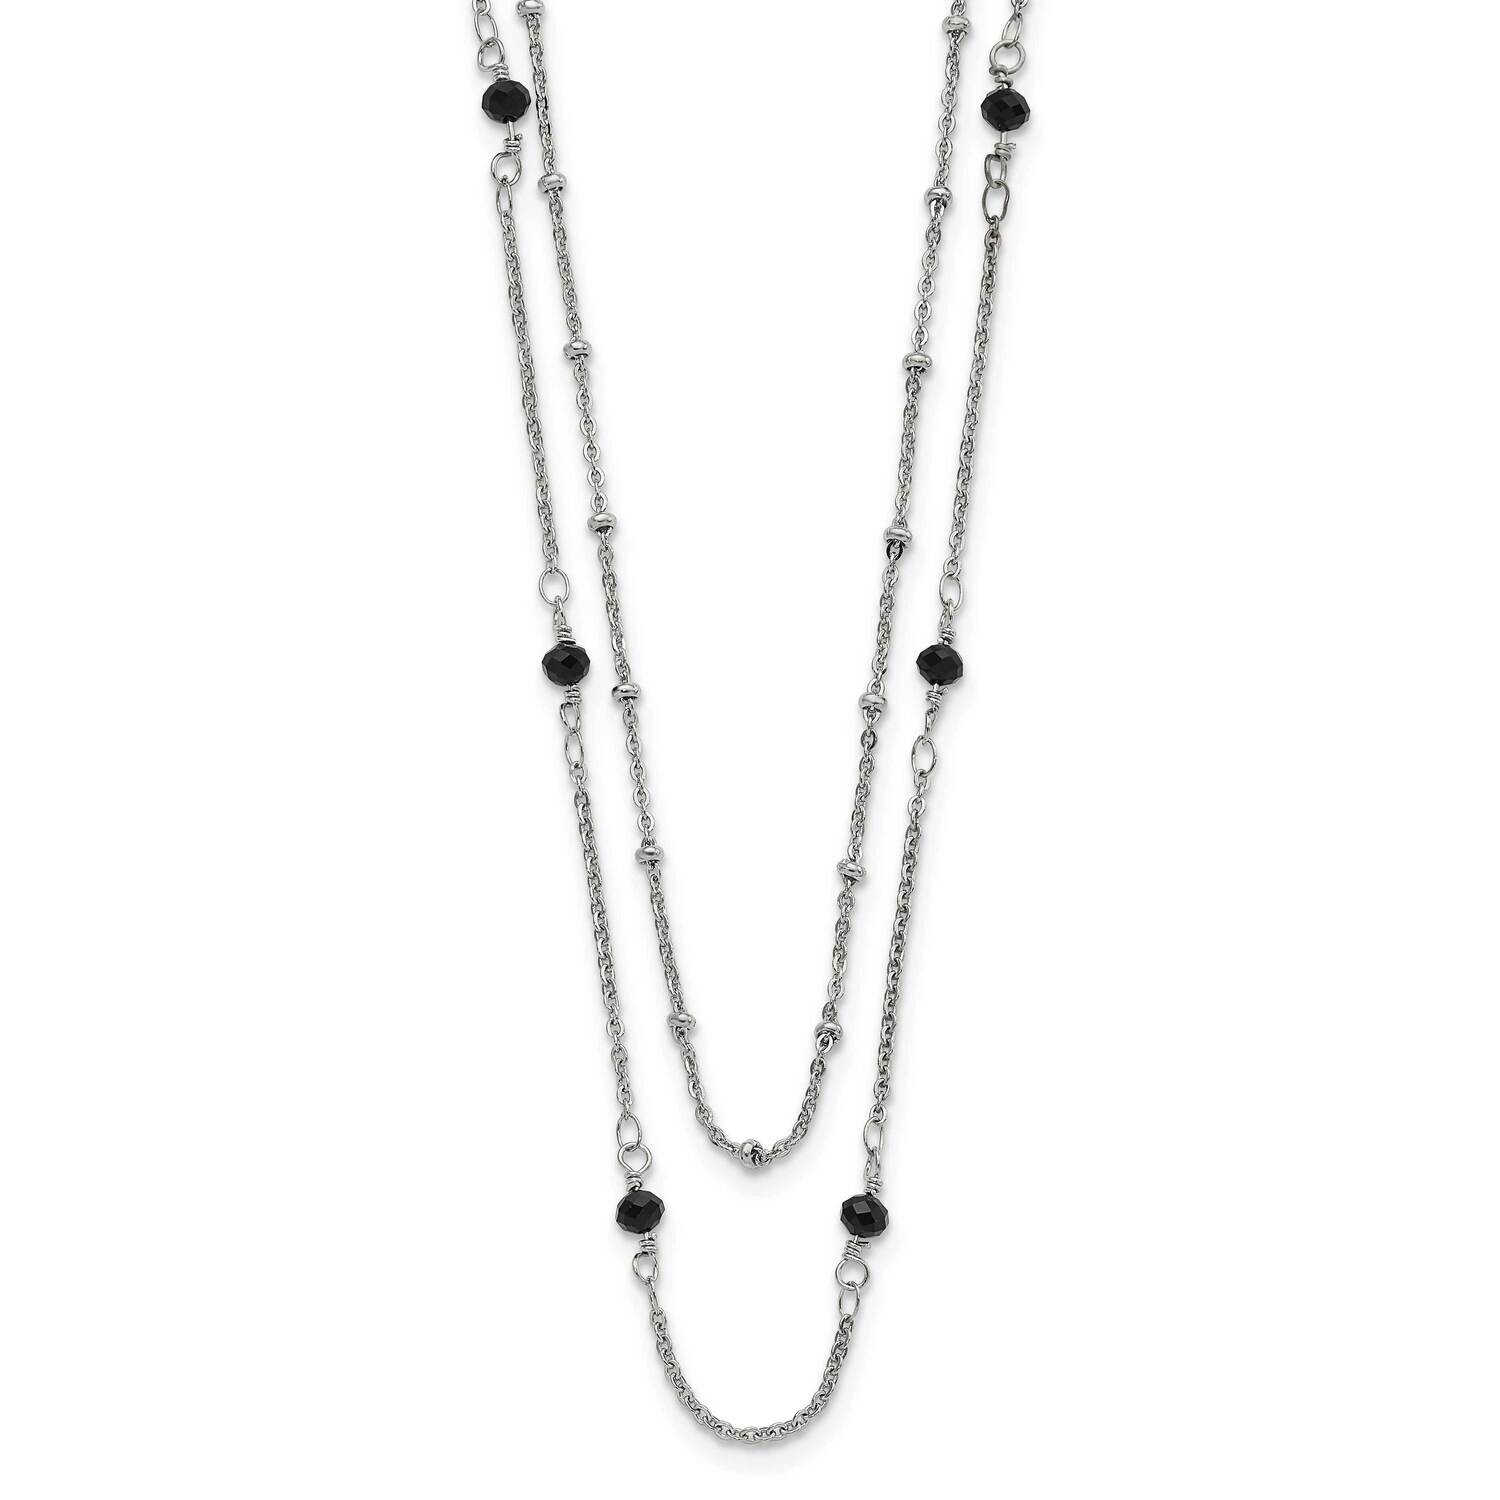 Chisel Polished 2-StrBlack Crystal Beaded 16 Inch 1 Inch Extension Necklace Stainless Steel SRN3106-16